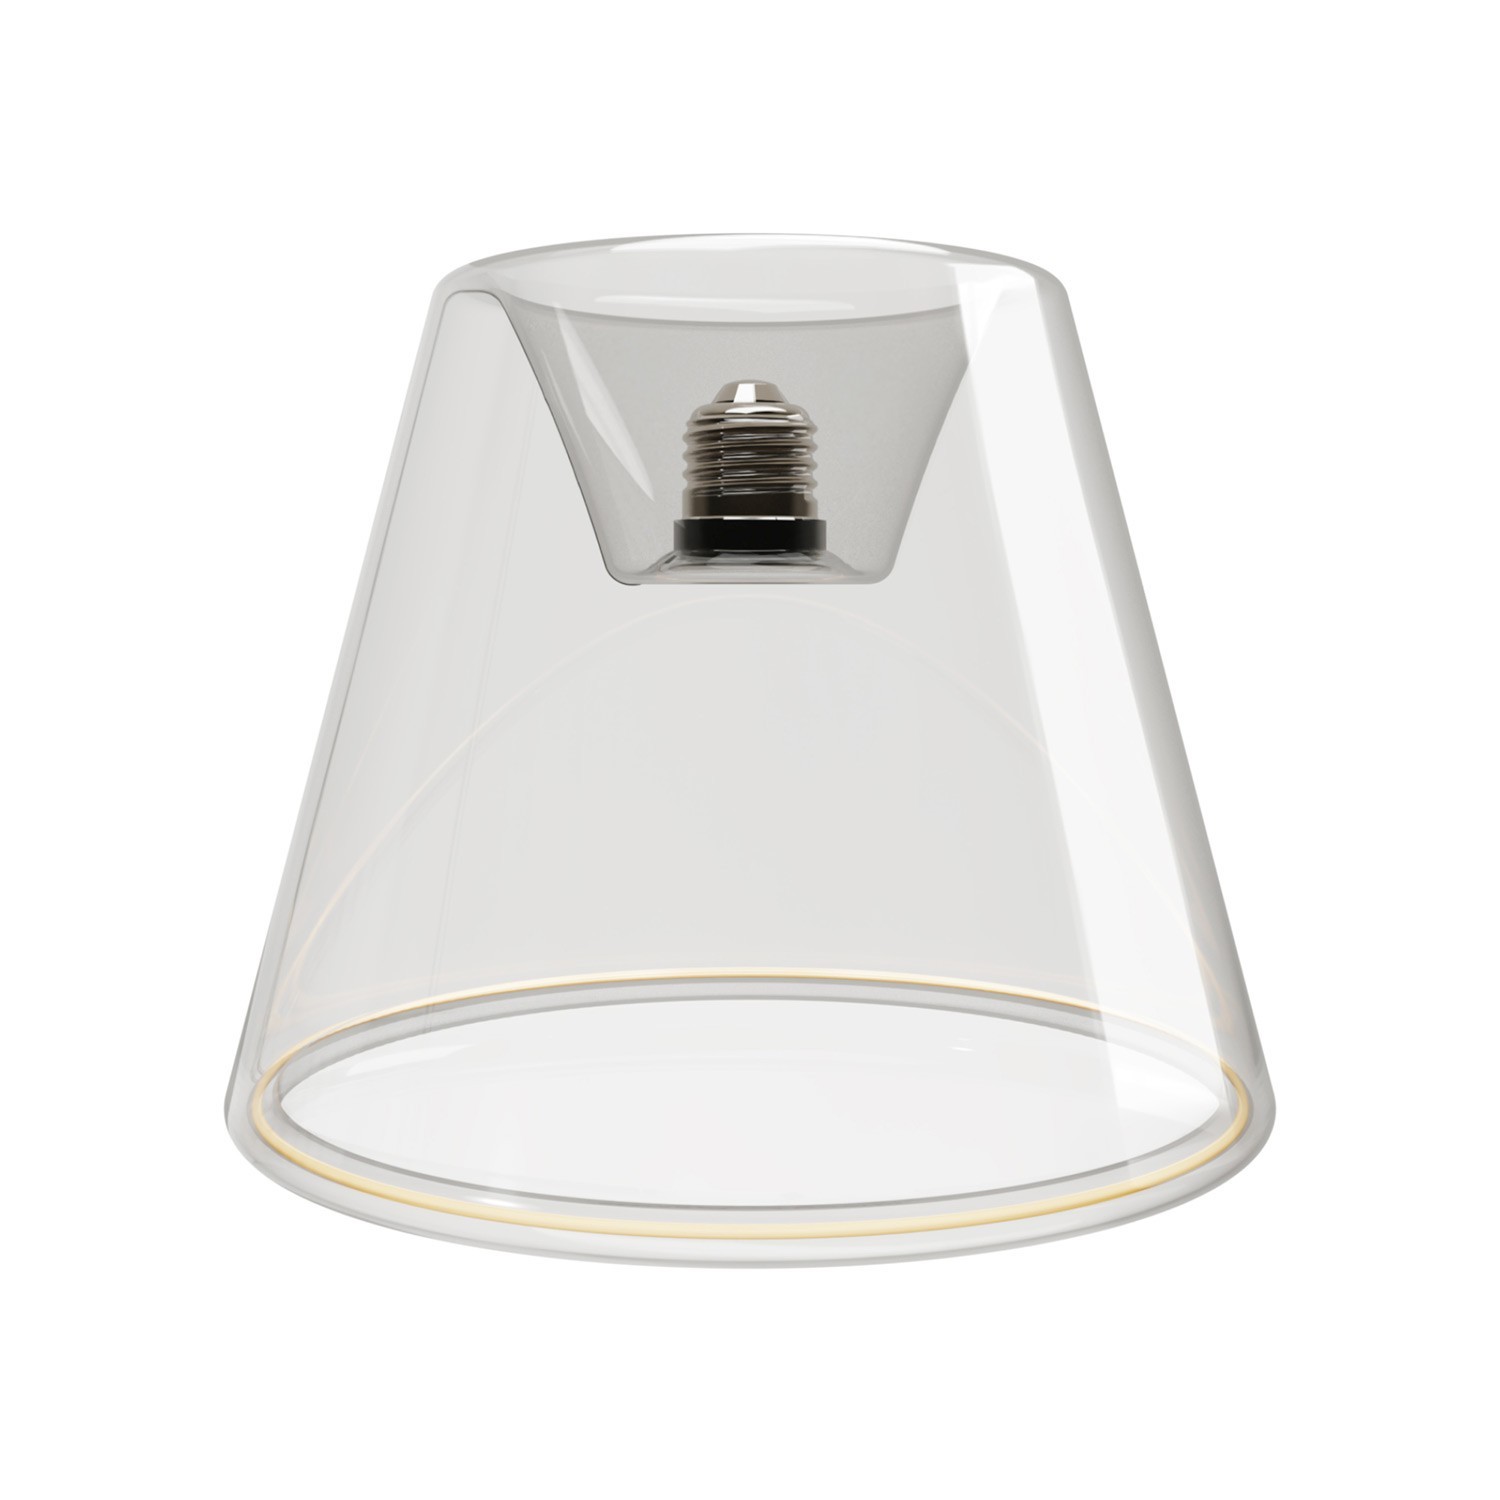 Design ceiling light with transparent cone-shaped Ghost bulb